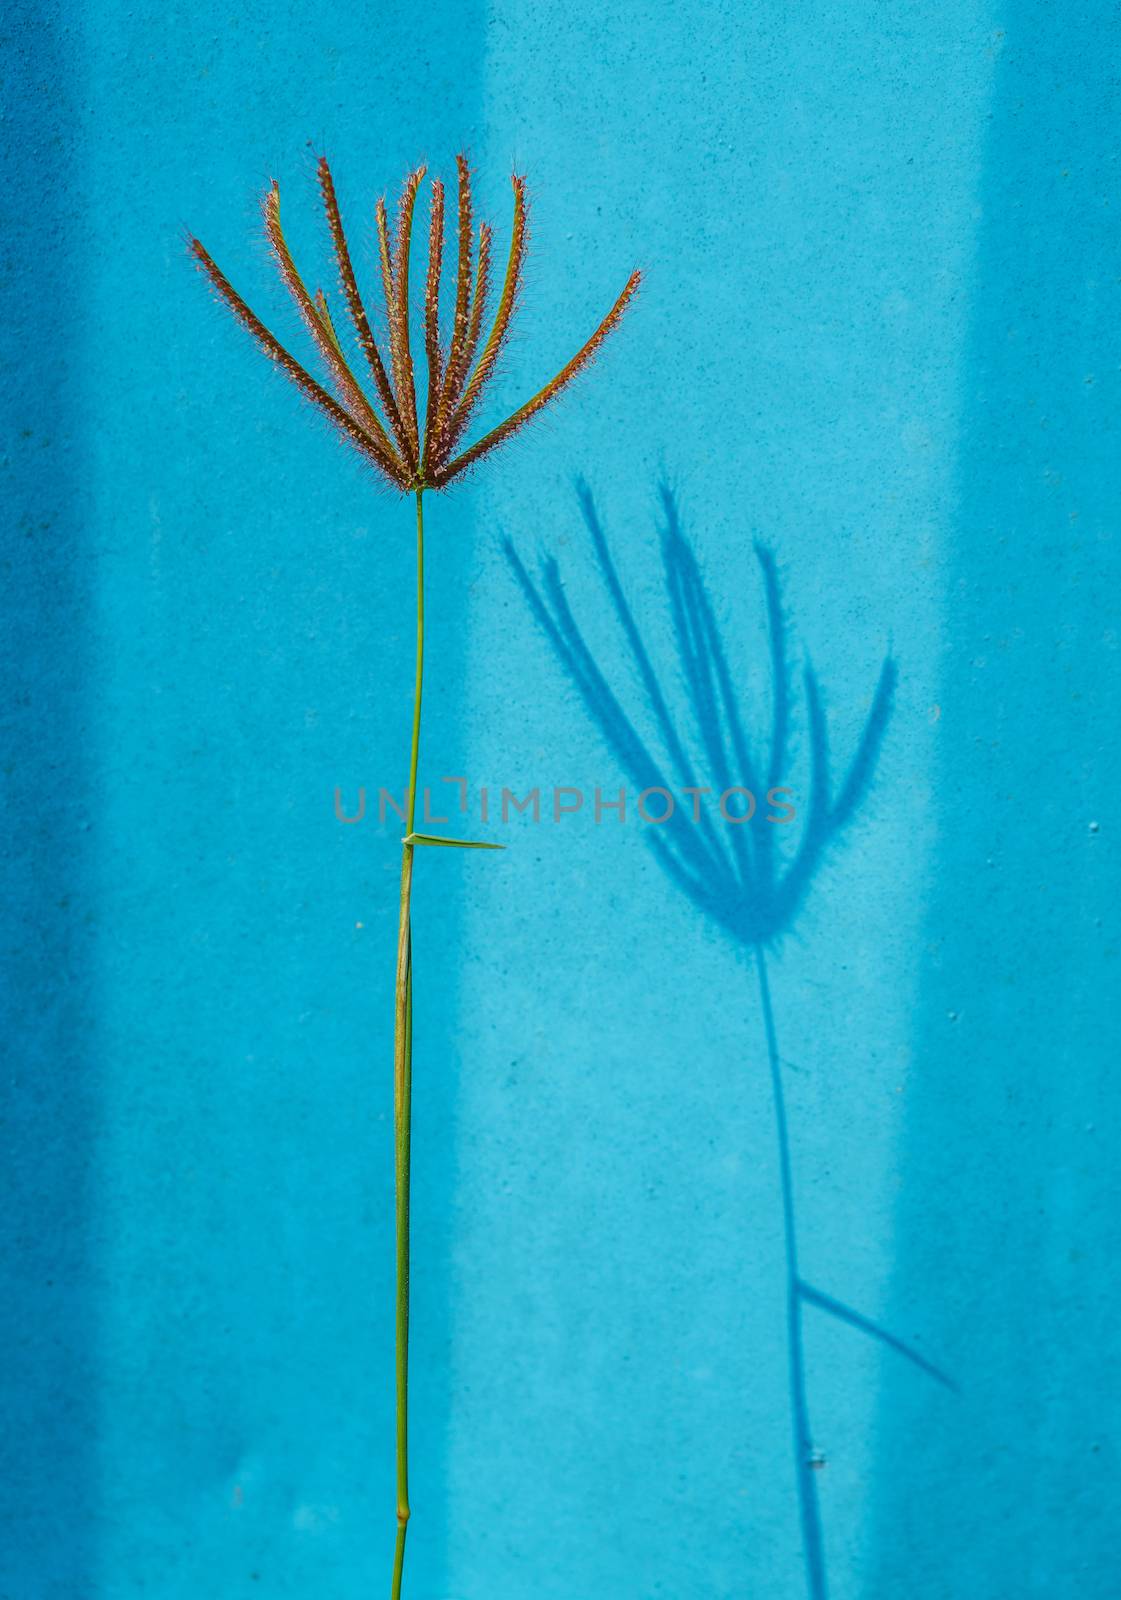 Grass flower and shadow on blue painted wall